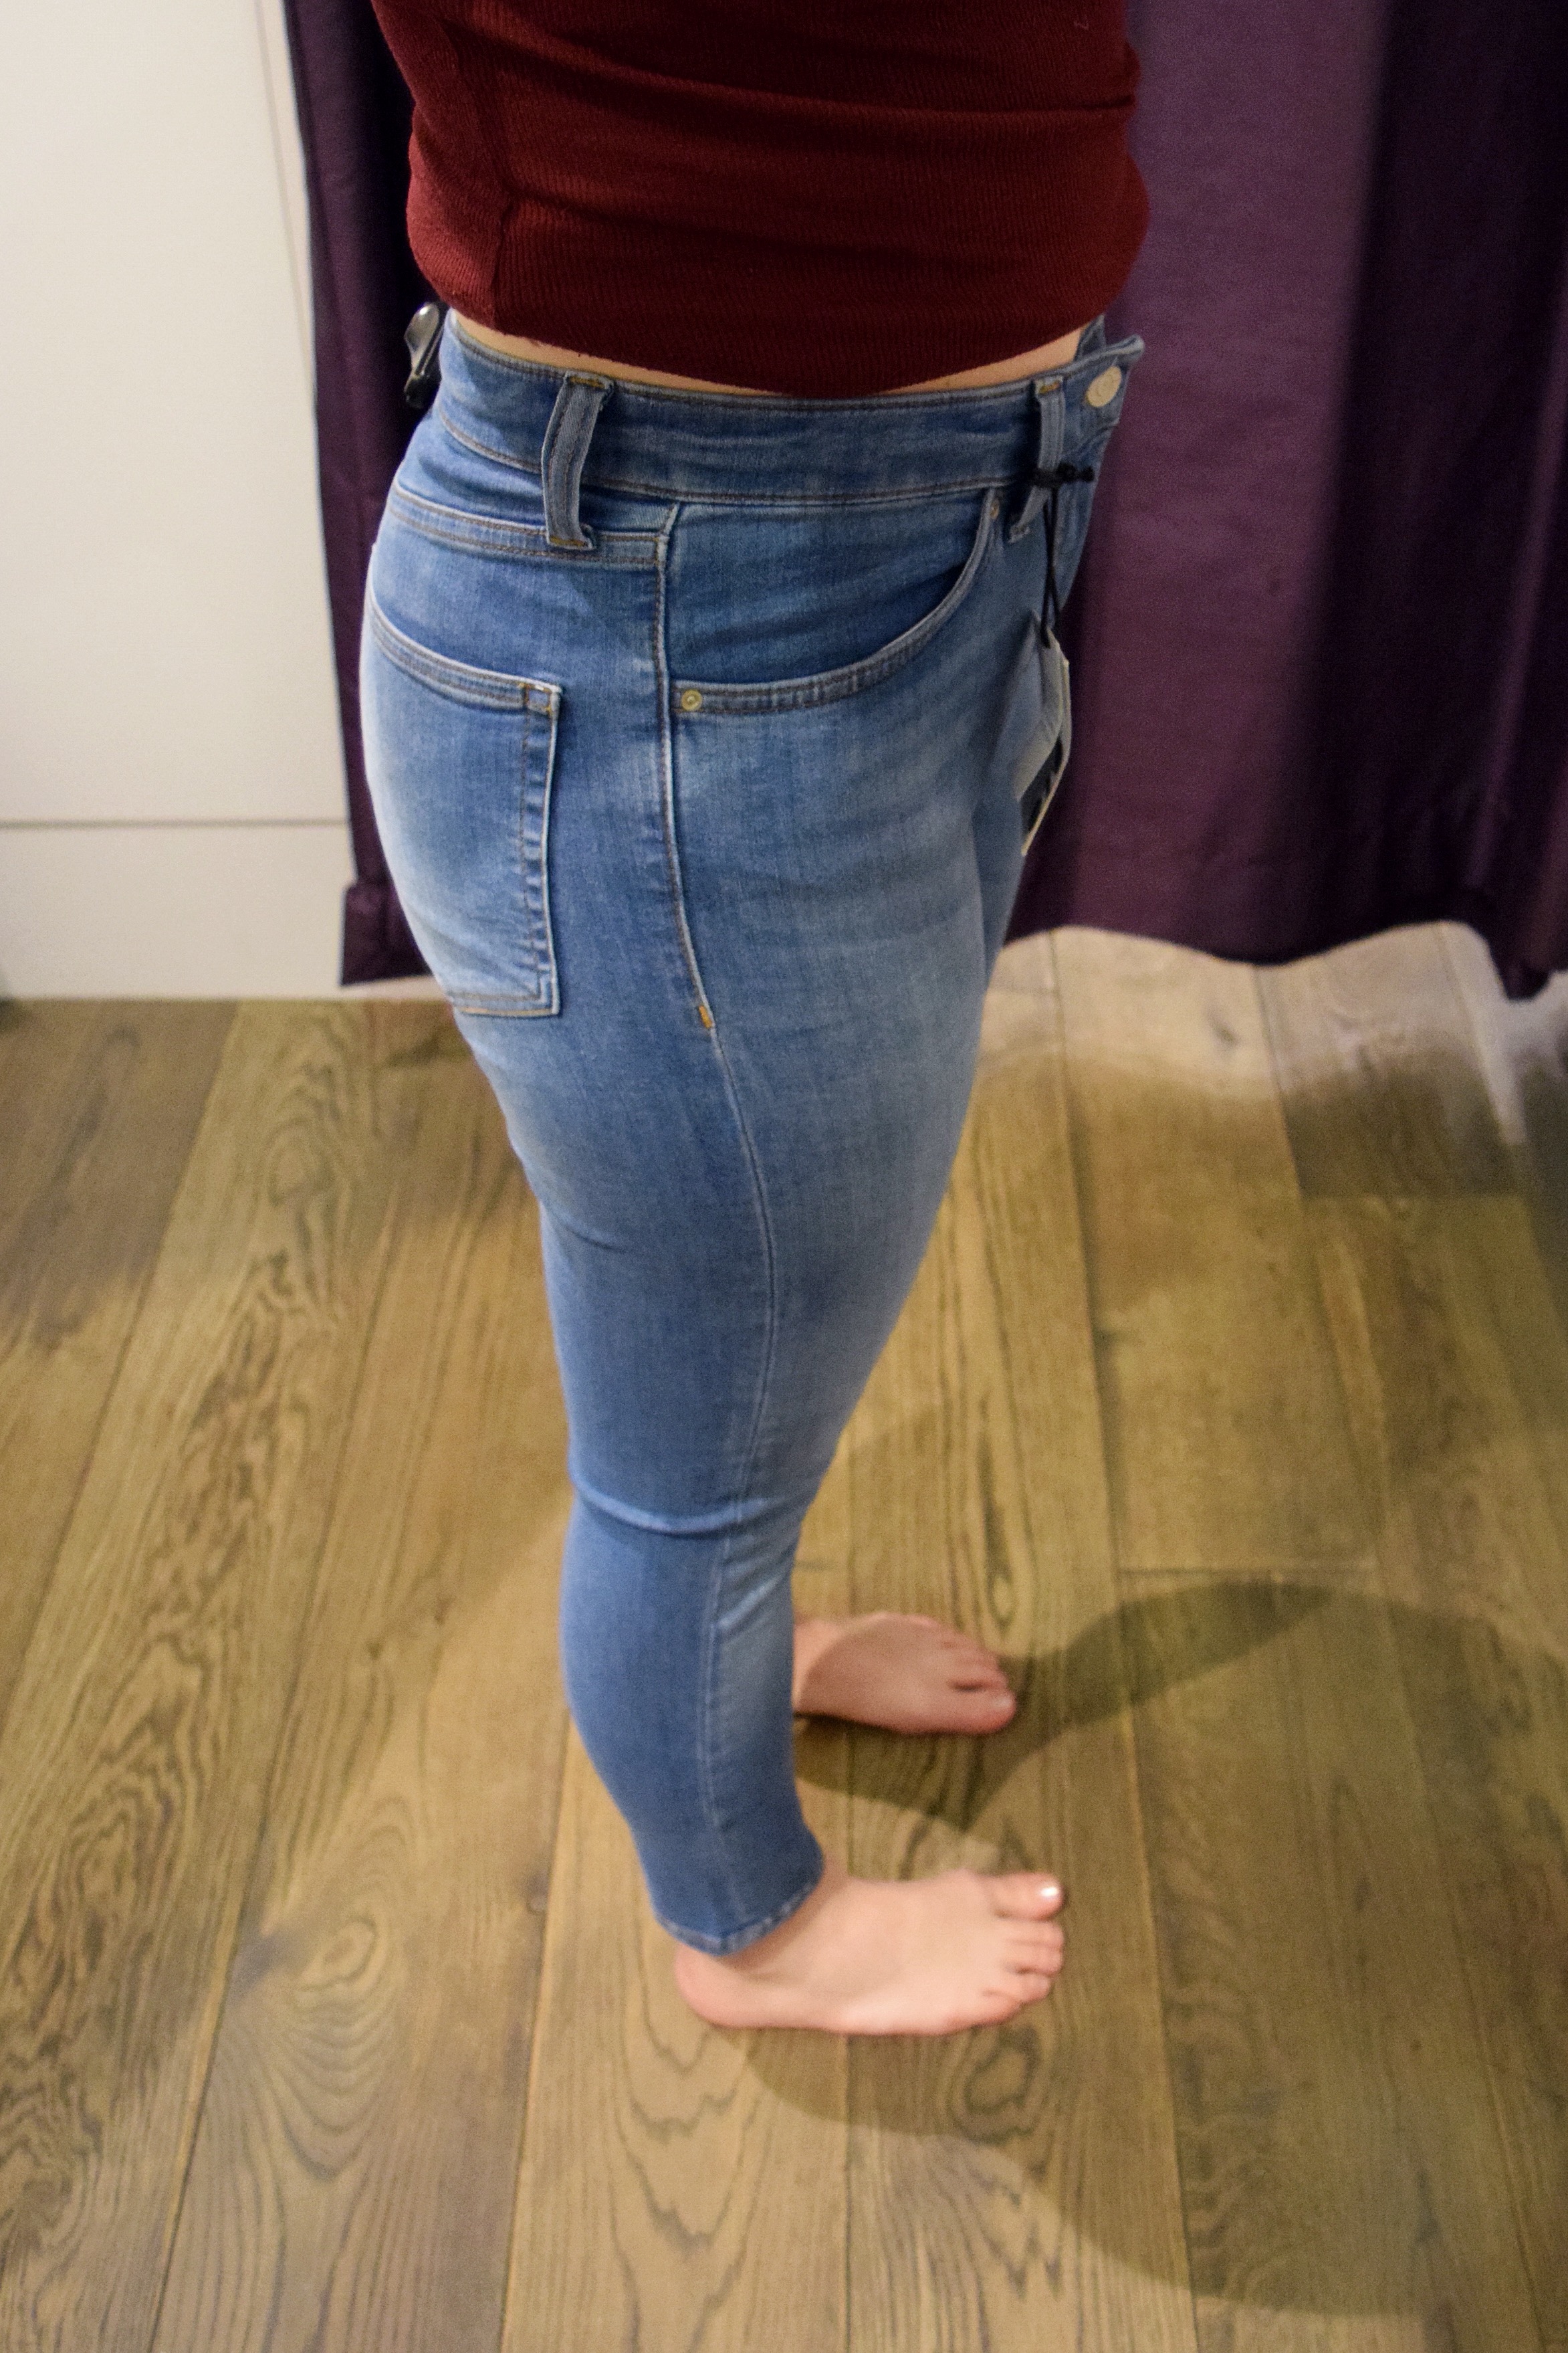 Tiny Ass In Jeans